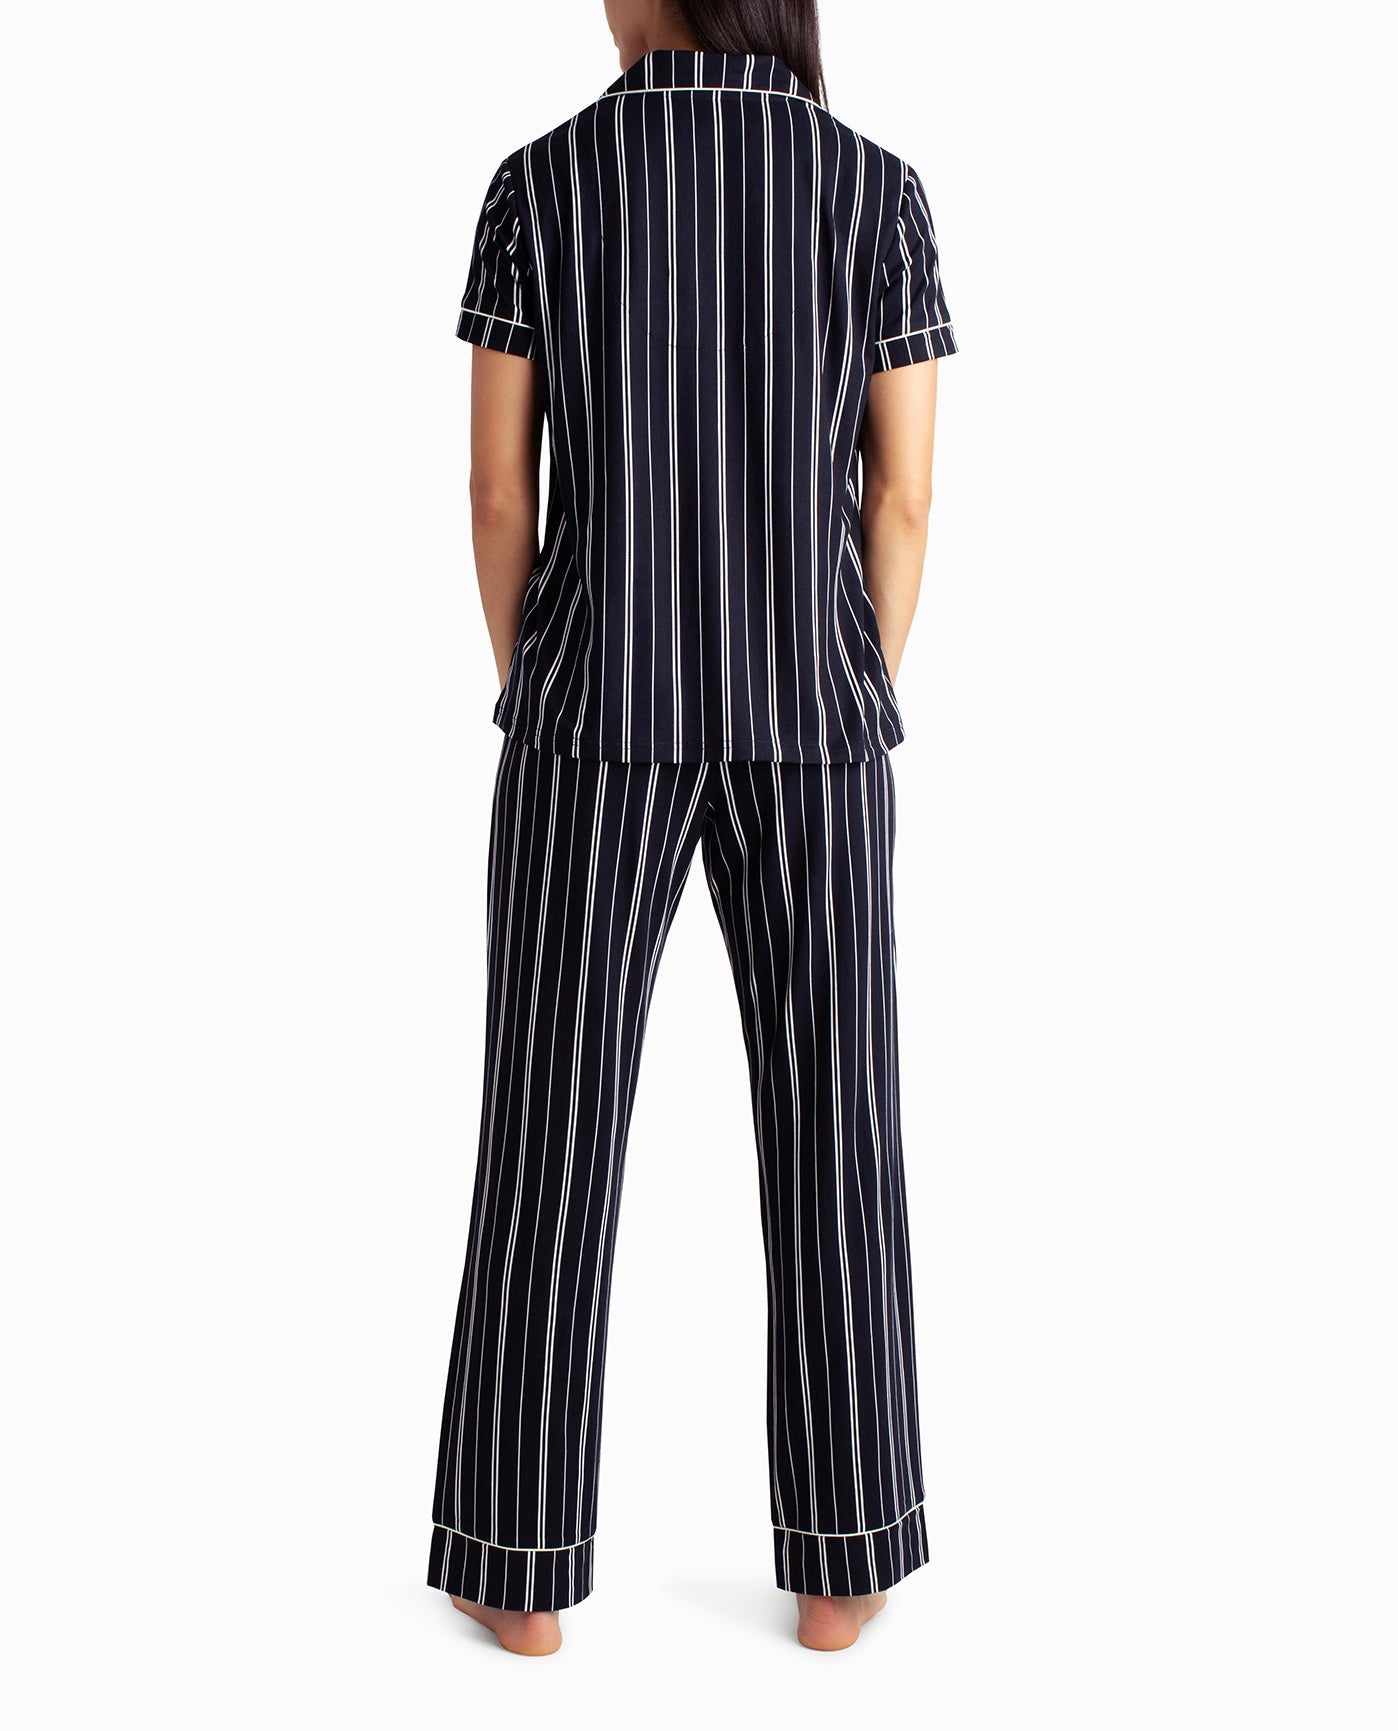 BACK OF PEACHED JERSEY SHIRT AND PANT TWO-PIECE SLEEPWEAR SET | Stormy Night Vertical Stripe